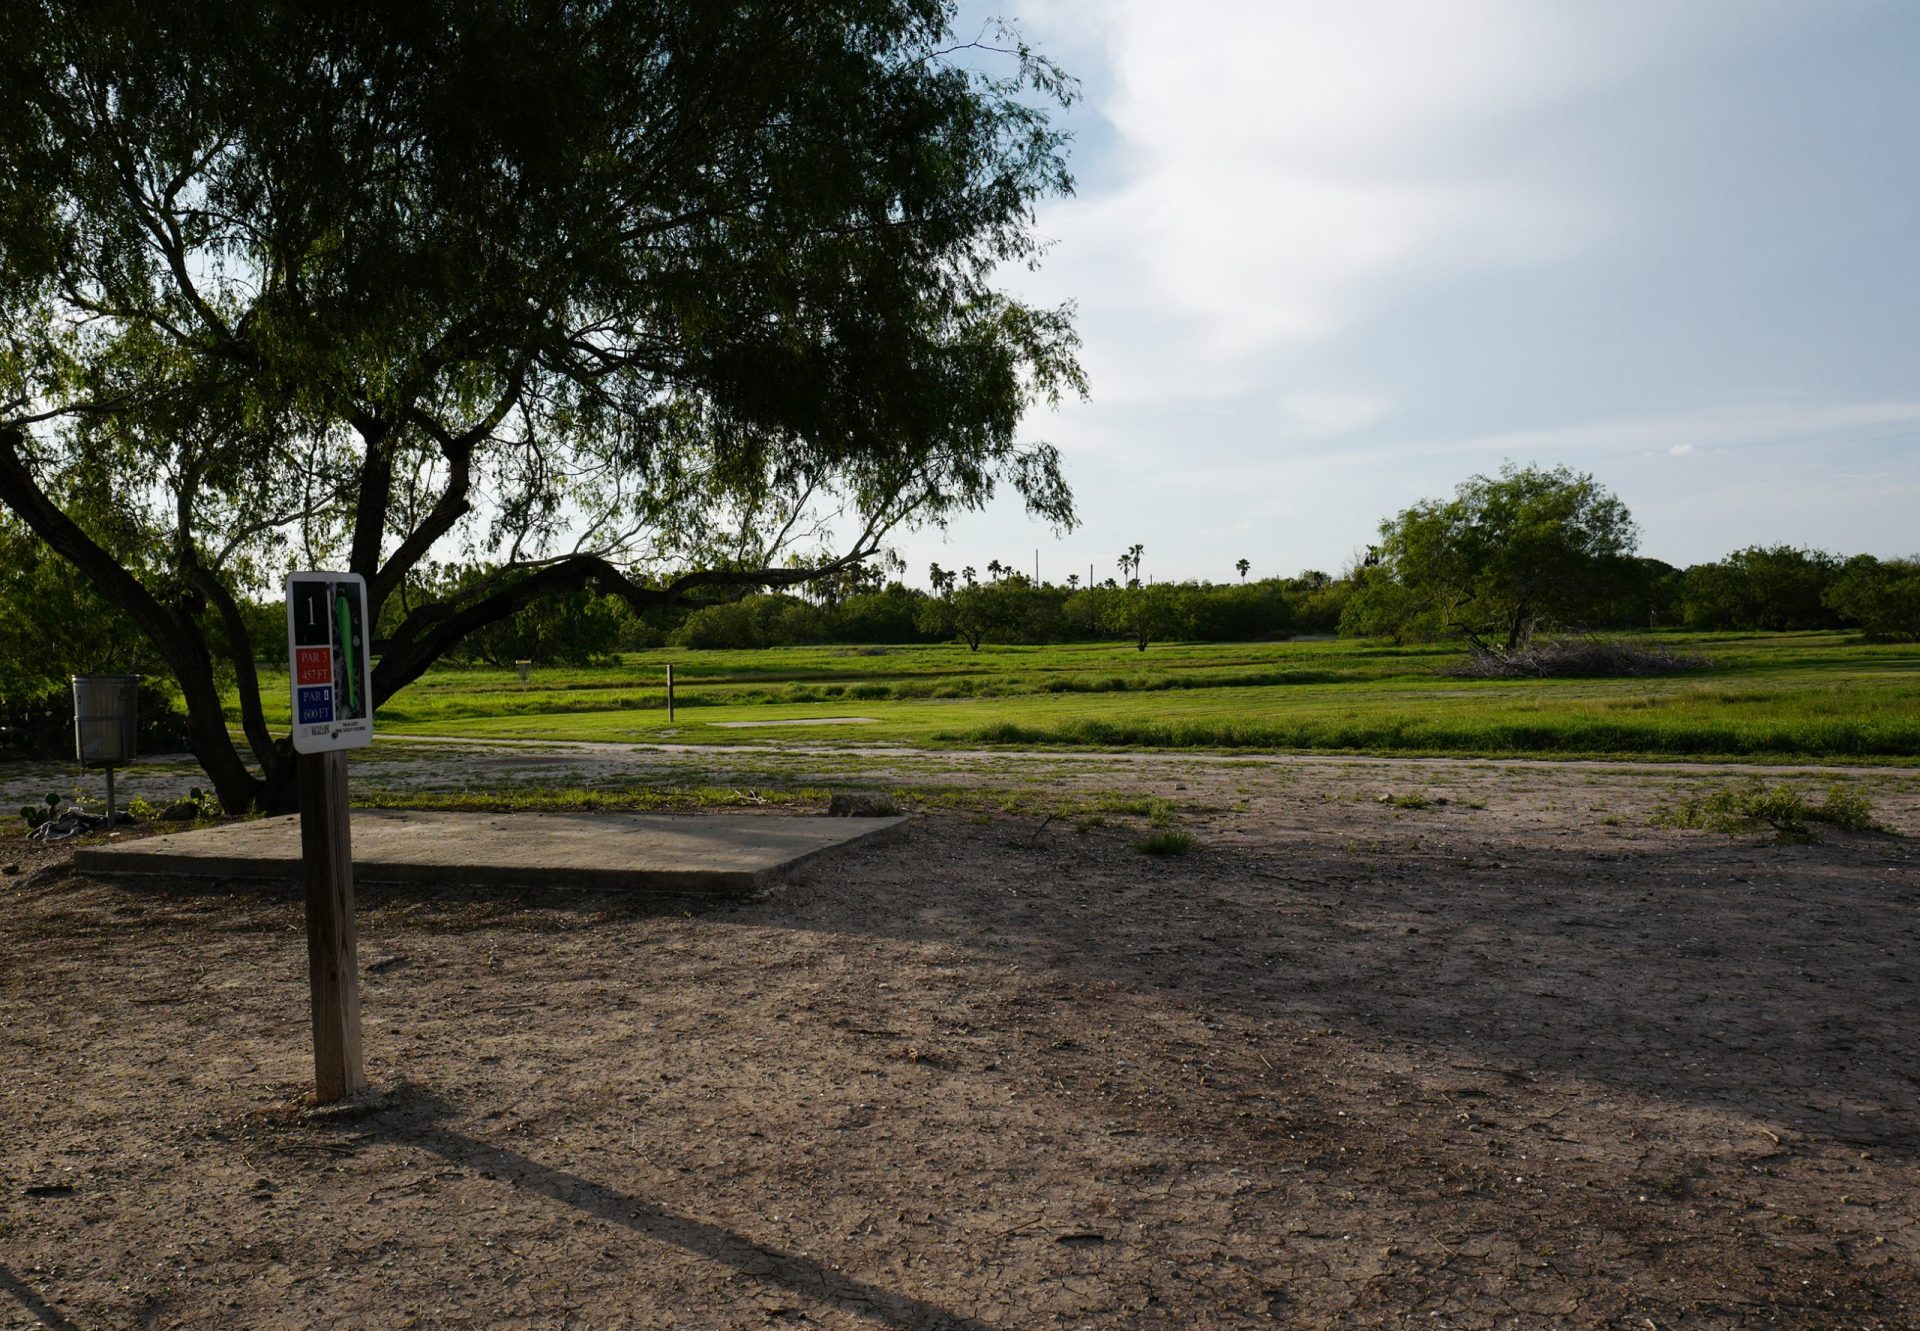 Fate of beloved McAllen park still unclear after contentious town hall